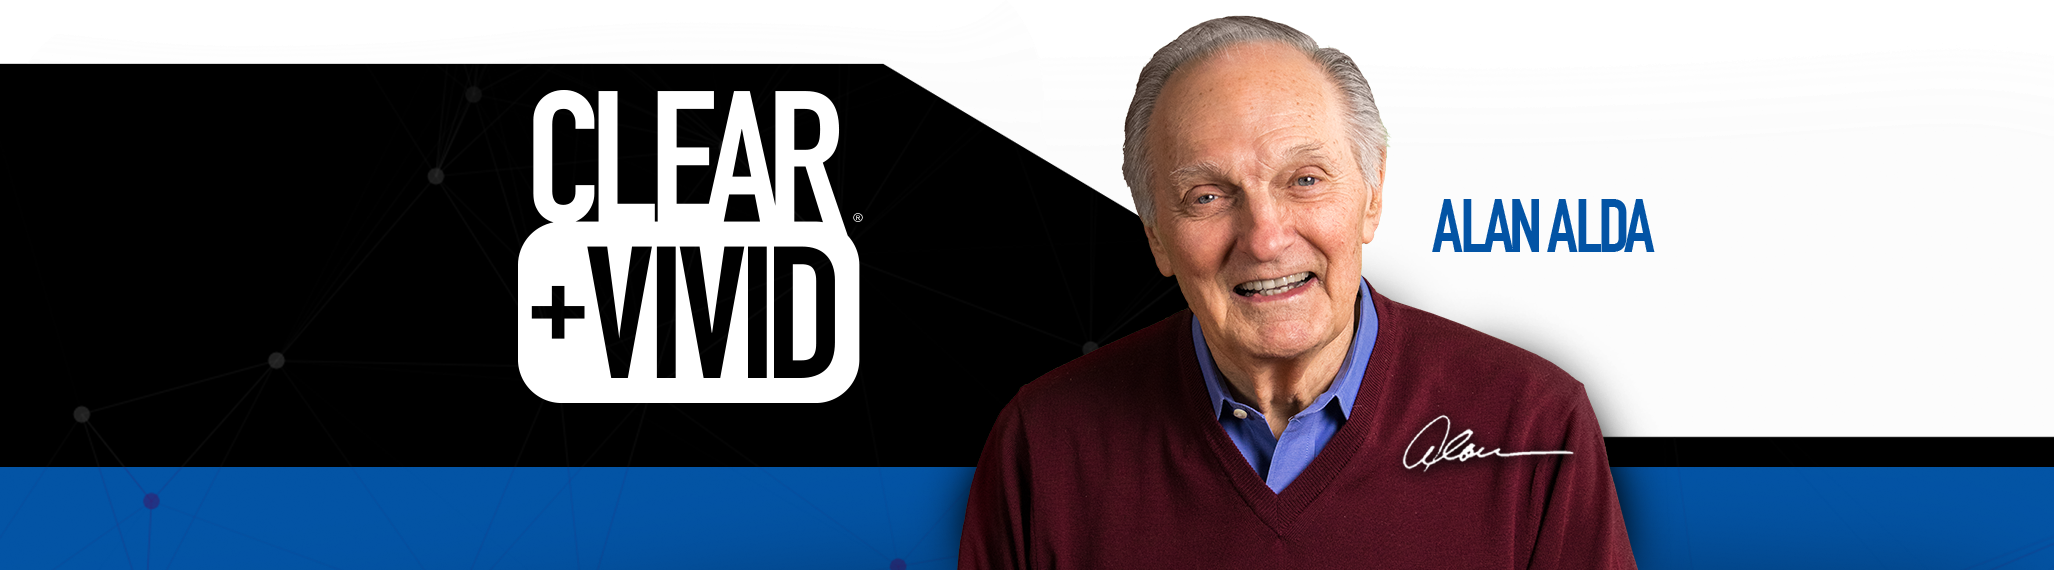 Alan Alda’s podcast, Clear and Vivid